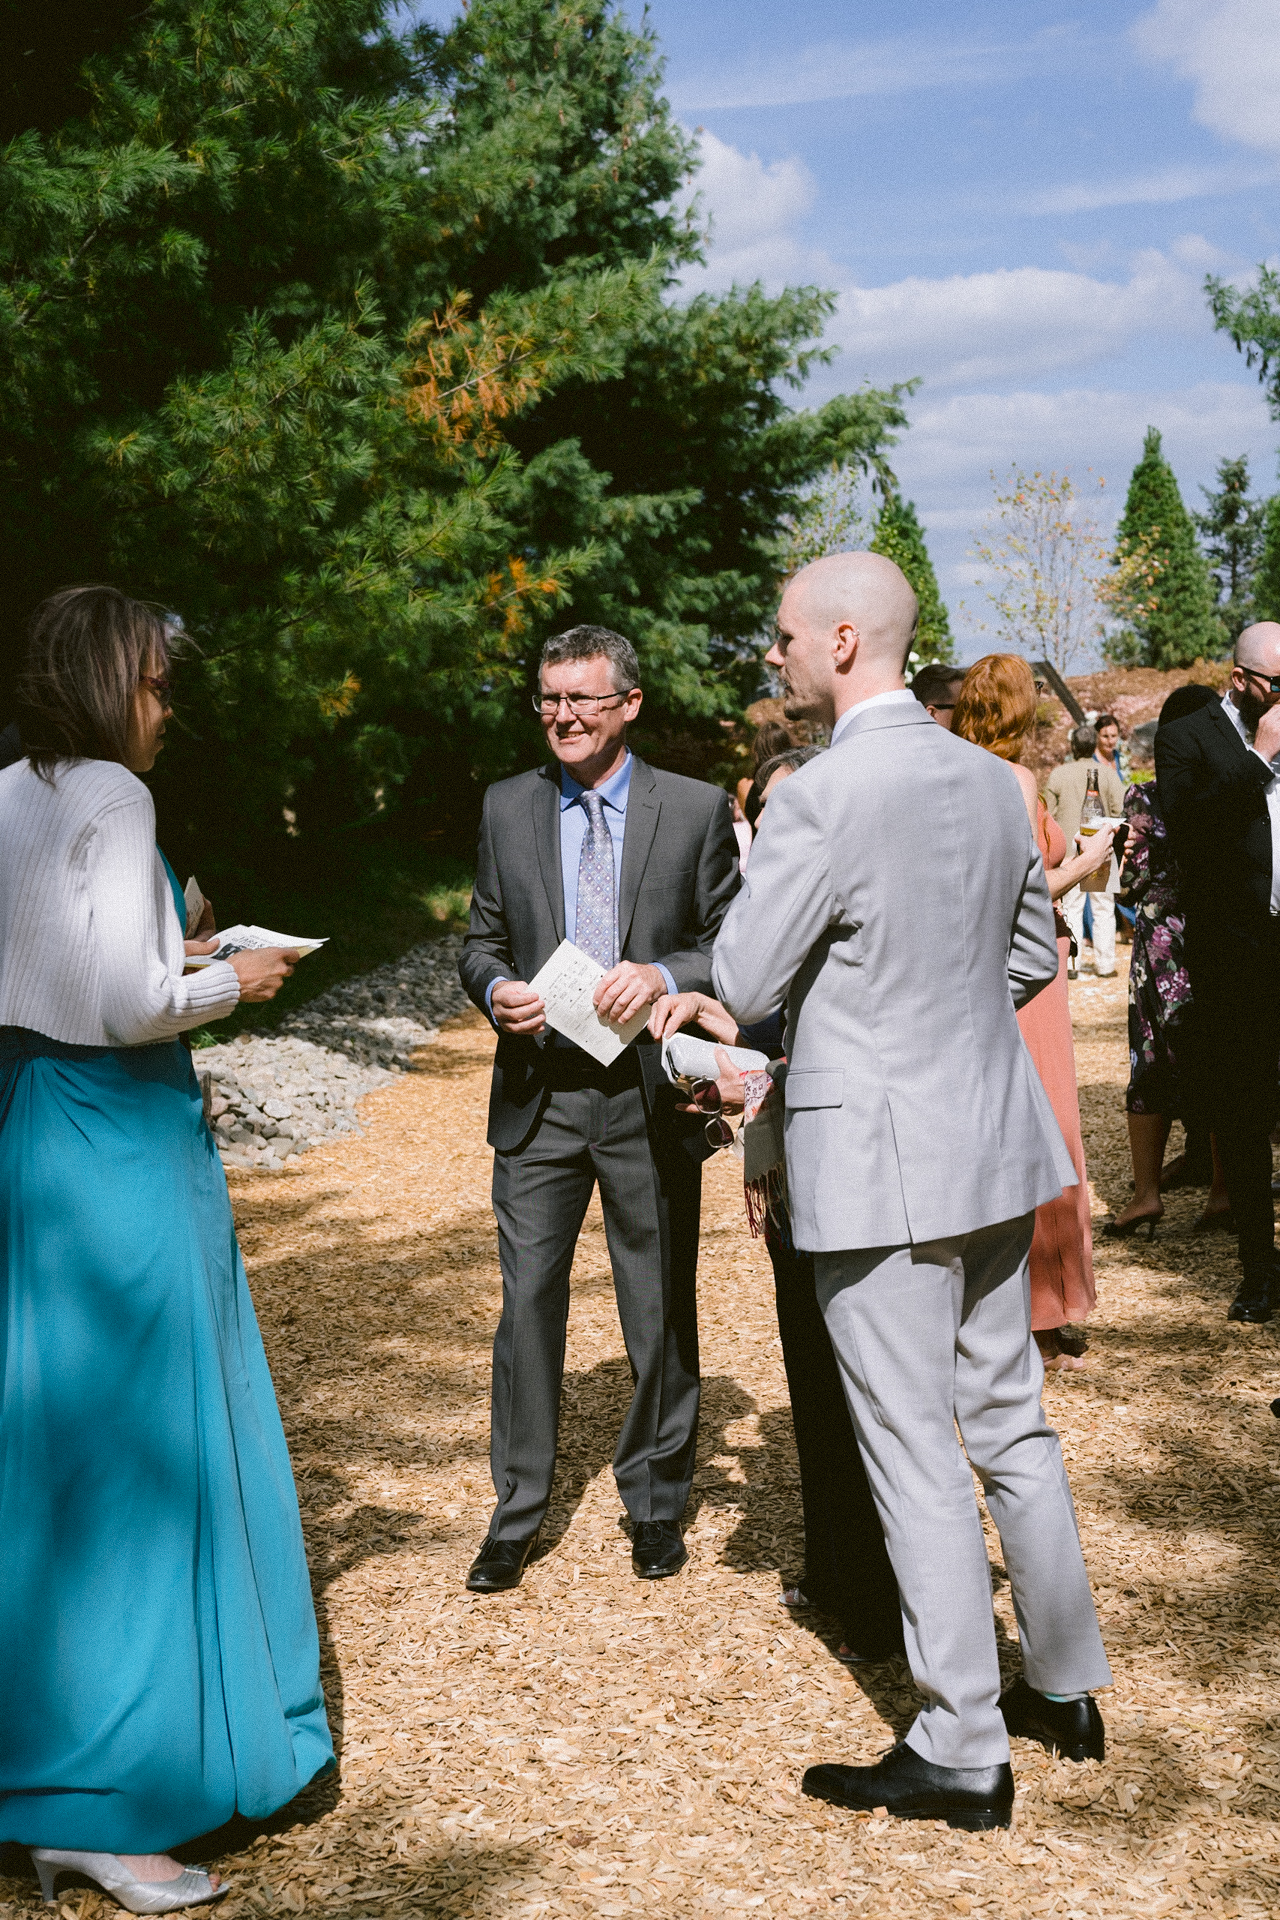 Groom warmly welcoming guests at an outdoor Cambium Farms wedding ceremony.